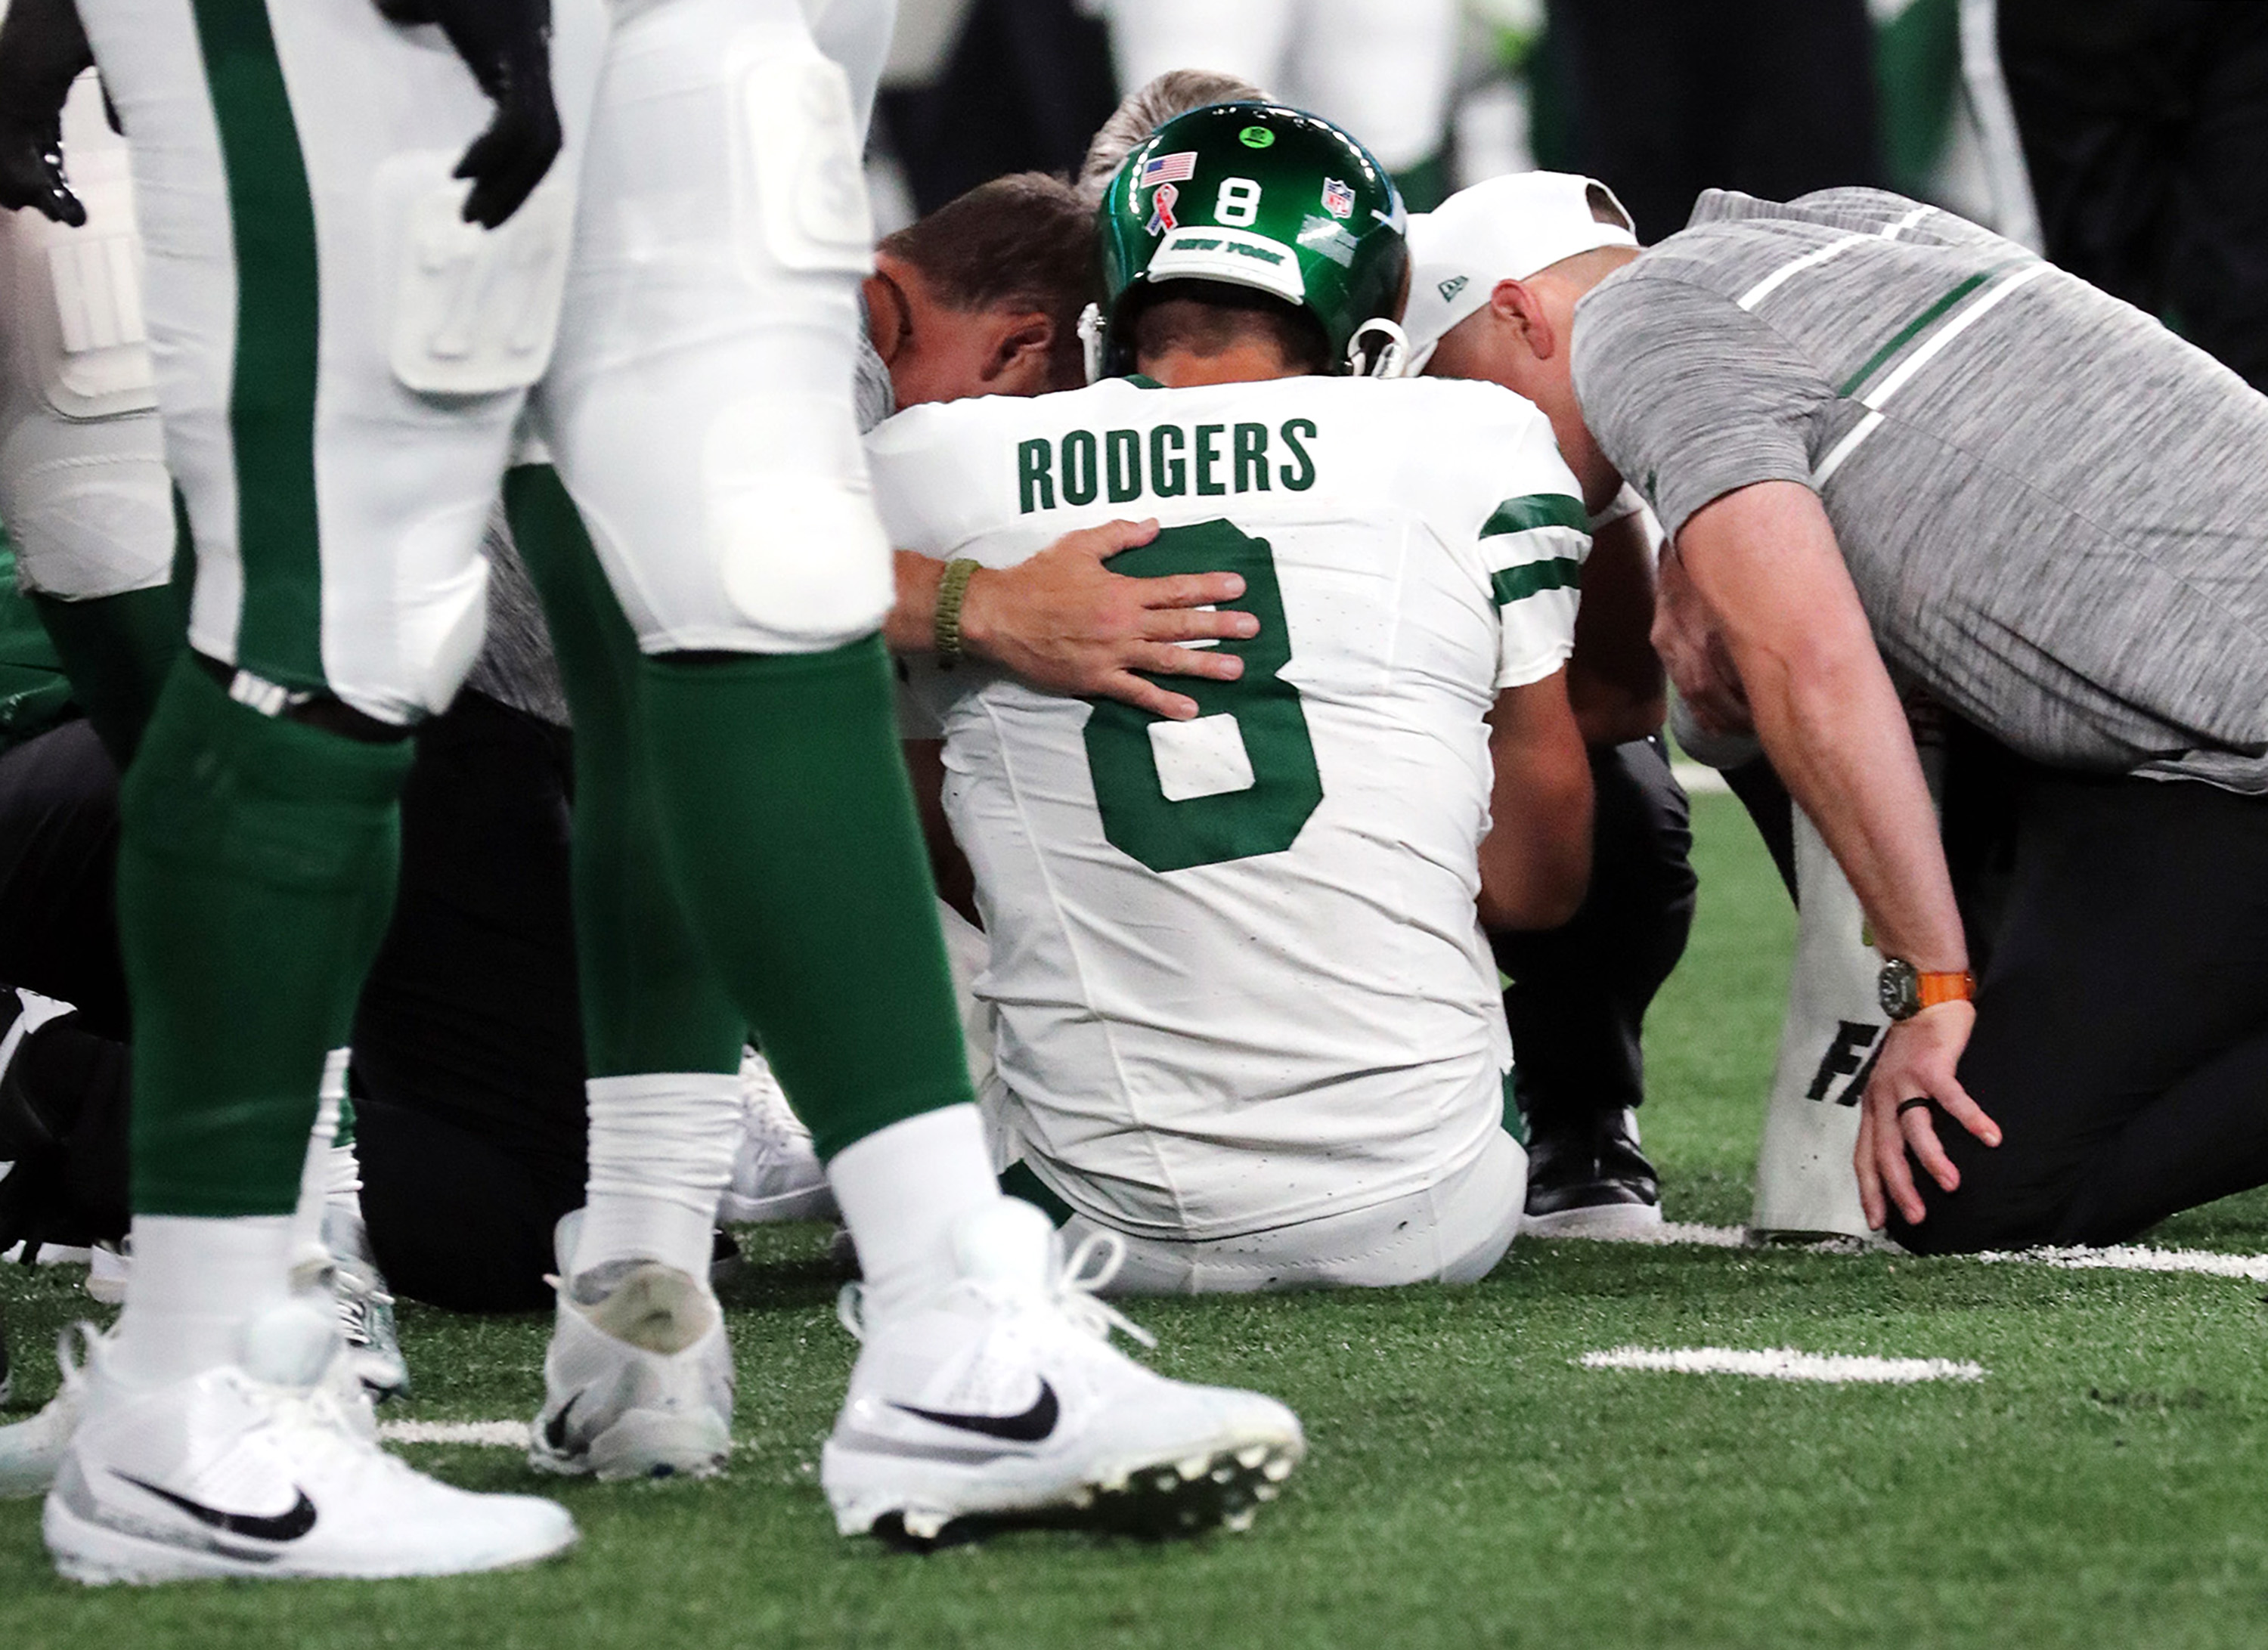 Quarterback Aaron Rodgers of the New York Jets is tended to after being sacked by Leonard Floyd of the Buffalo Bills.